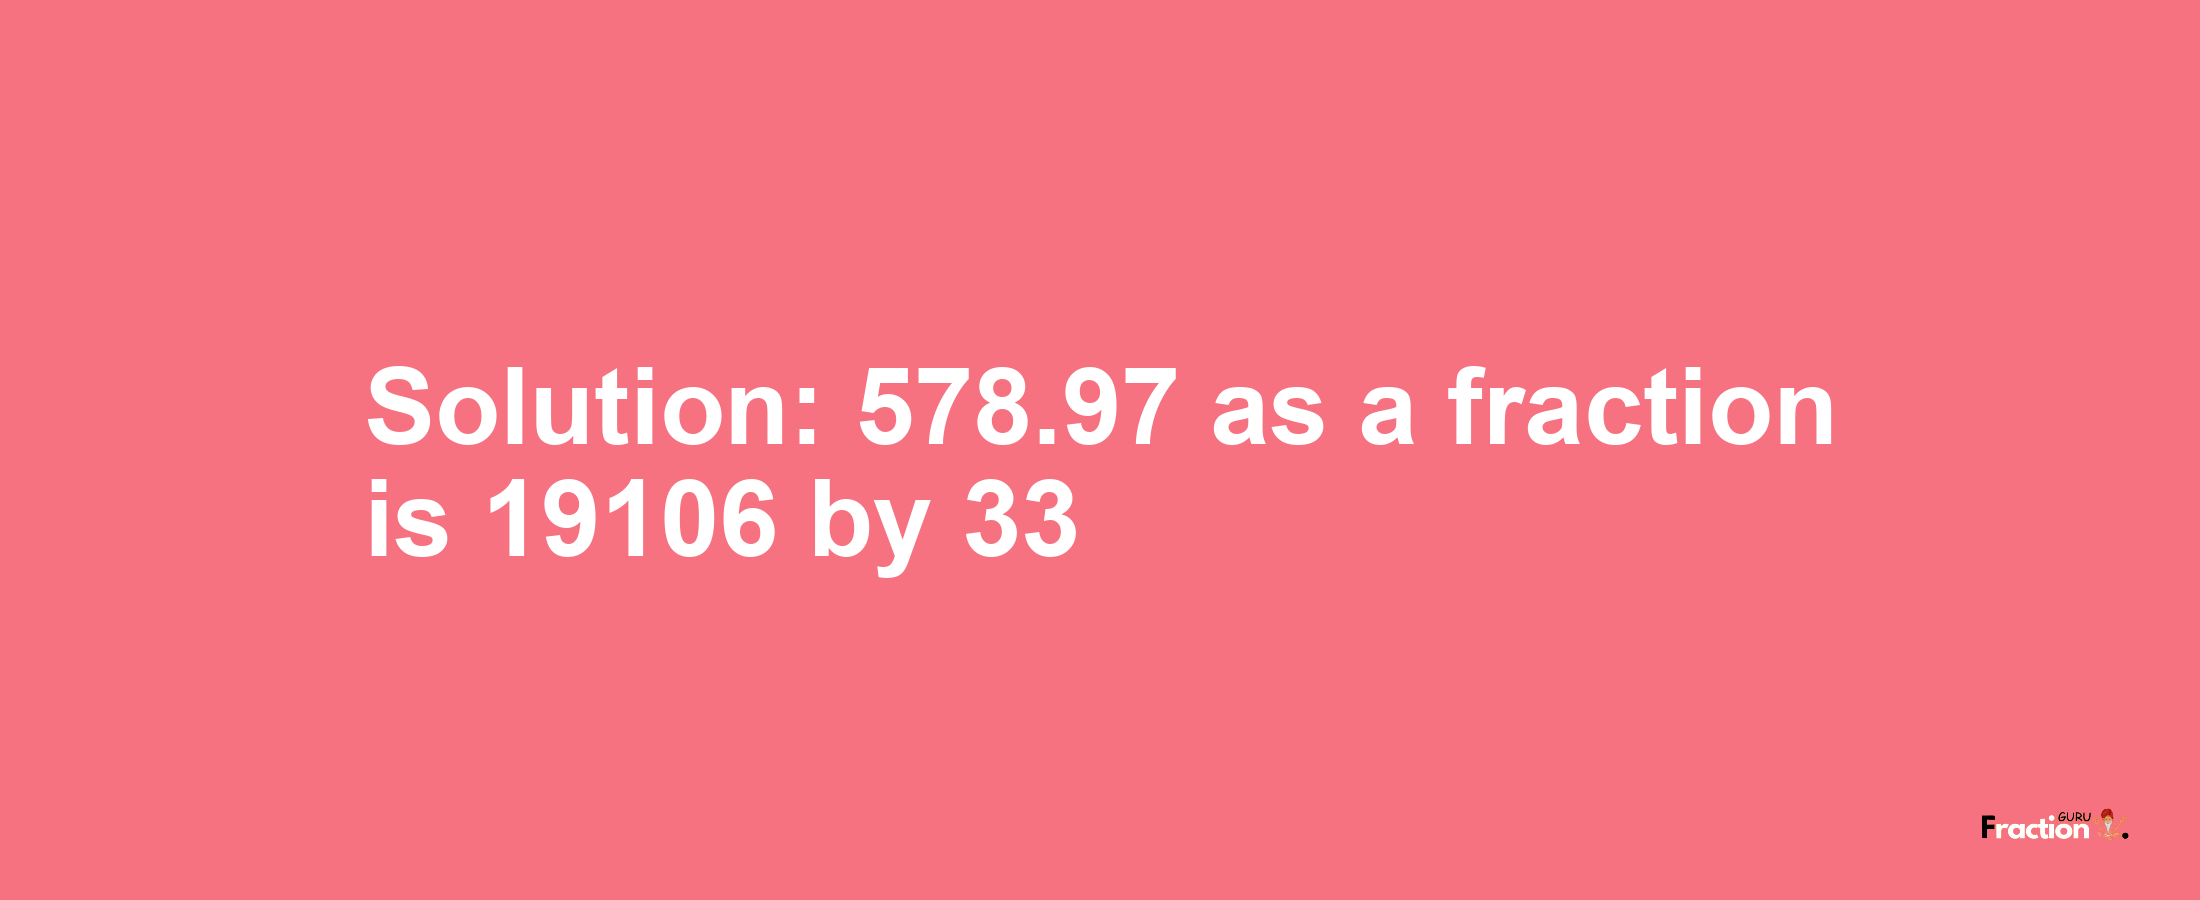 Solution:578.97 as a fraction is 19106/33